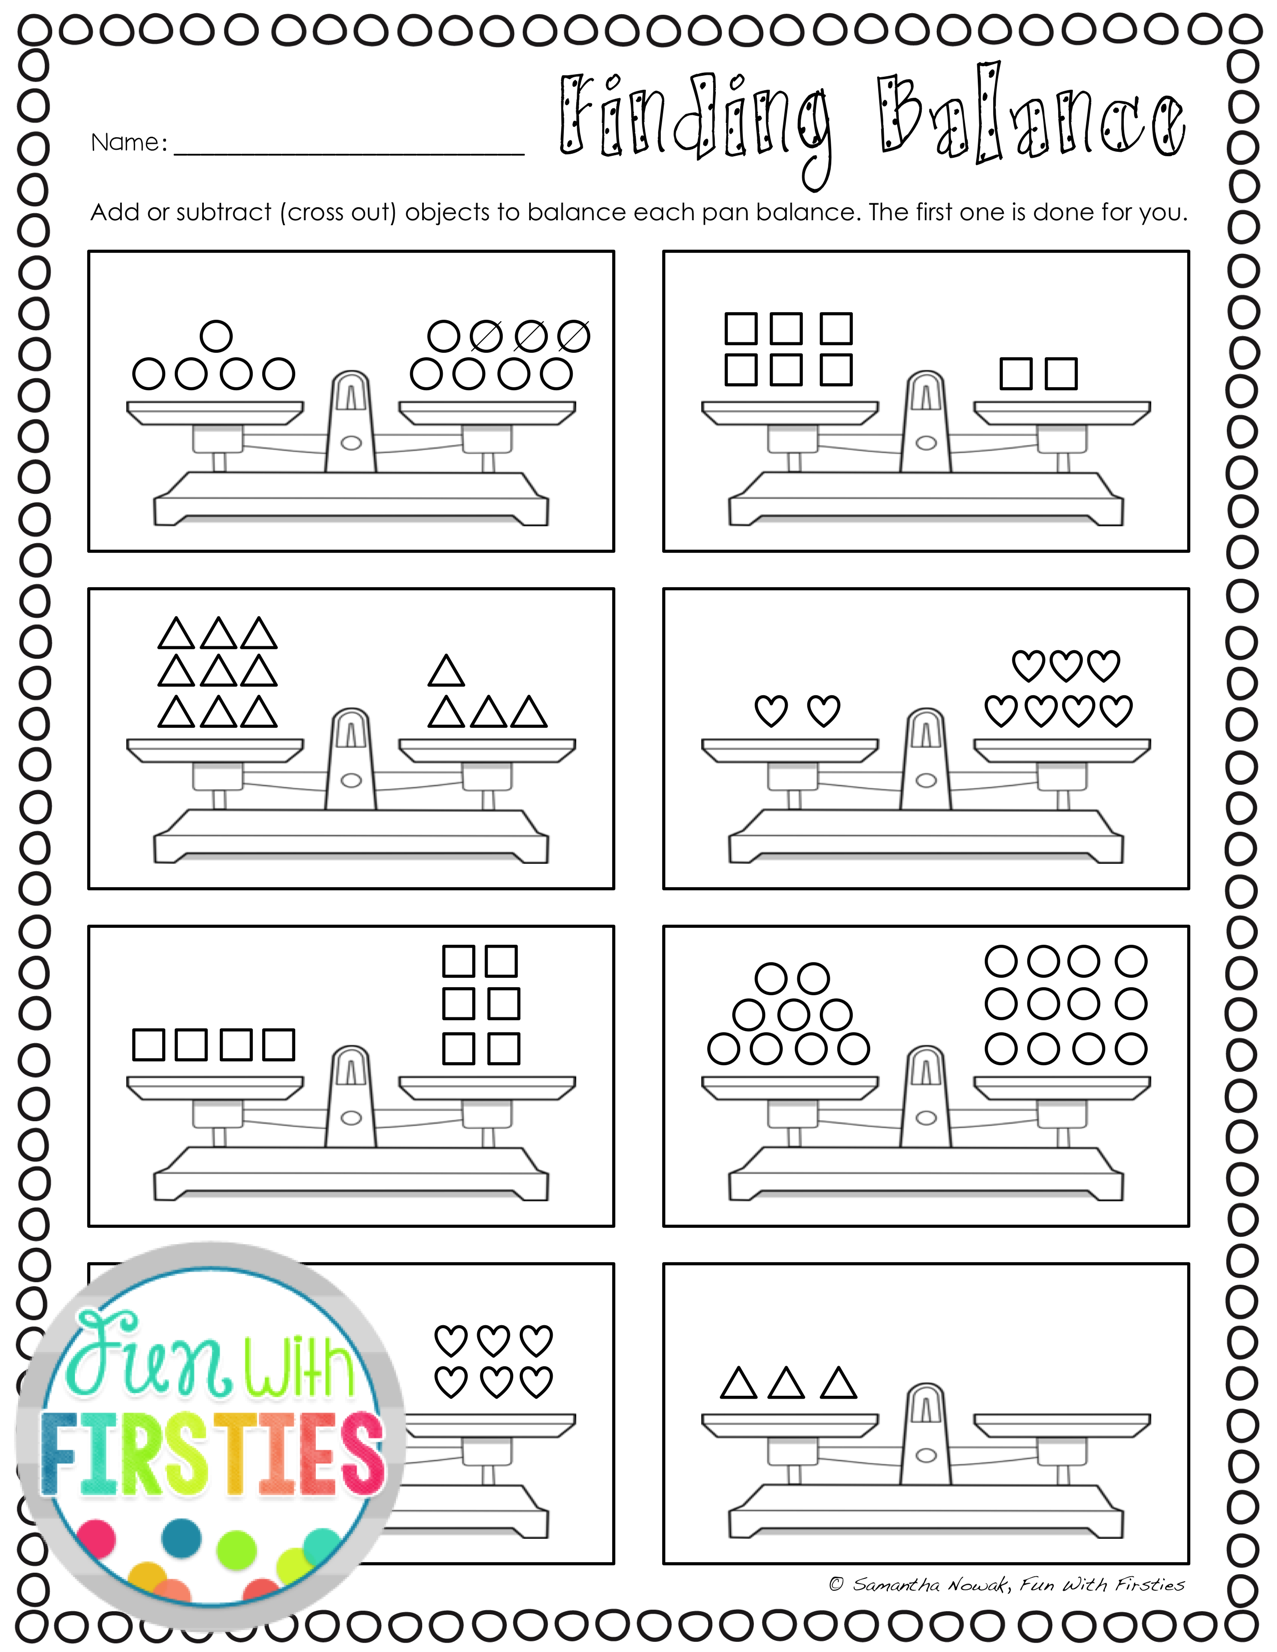 Balancing Equations Print Go Worksheets For Extra Practice And or